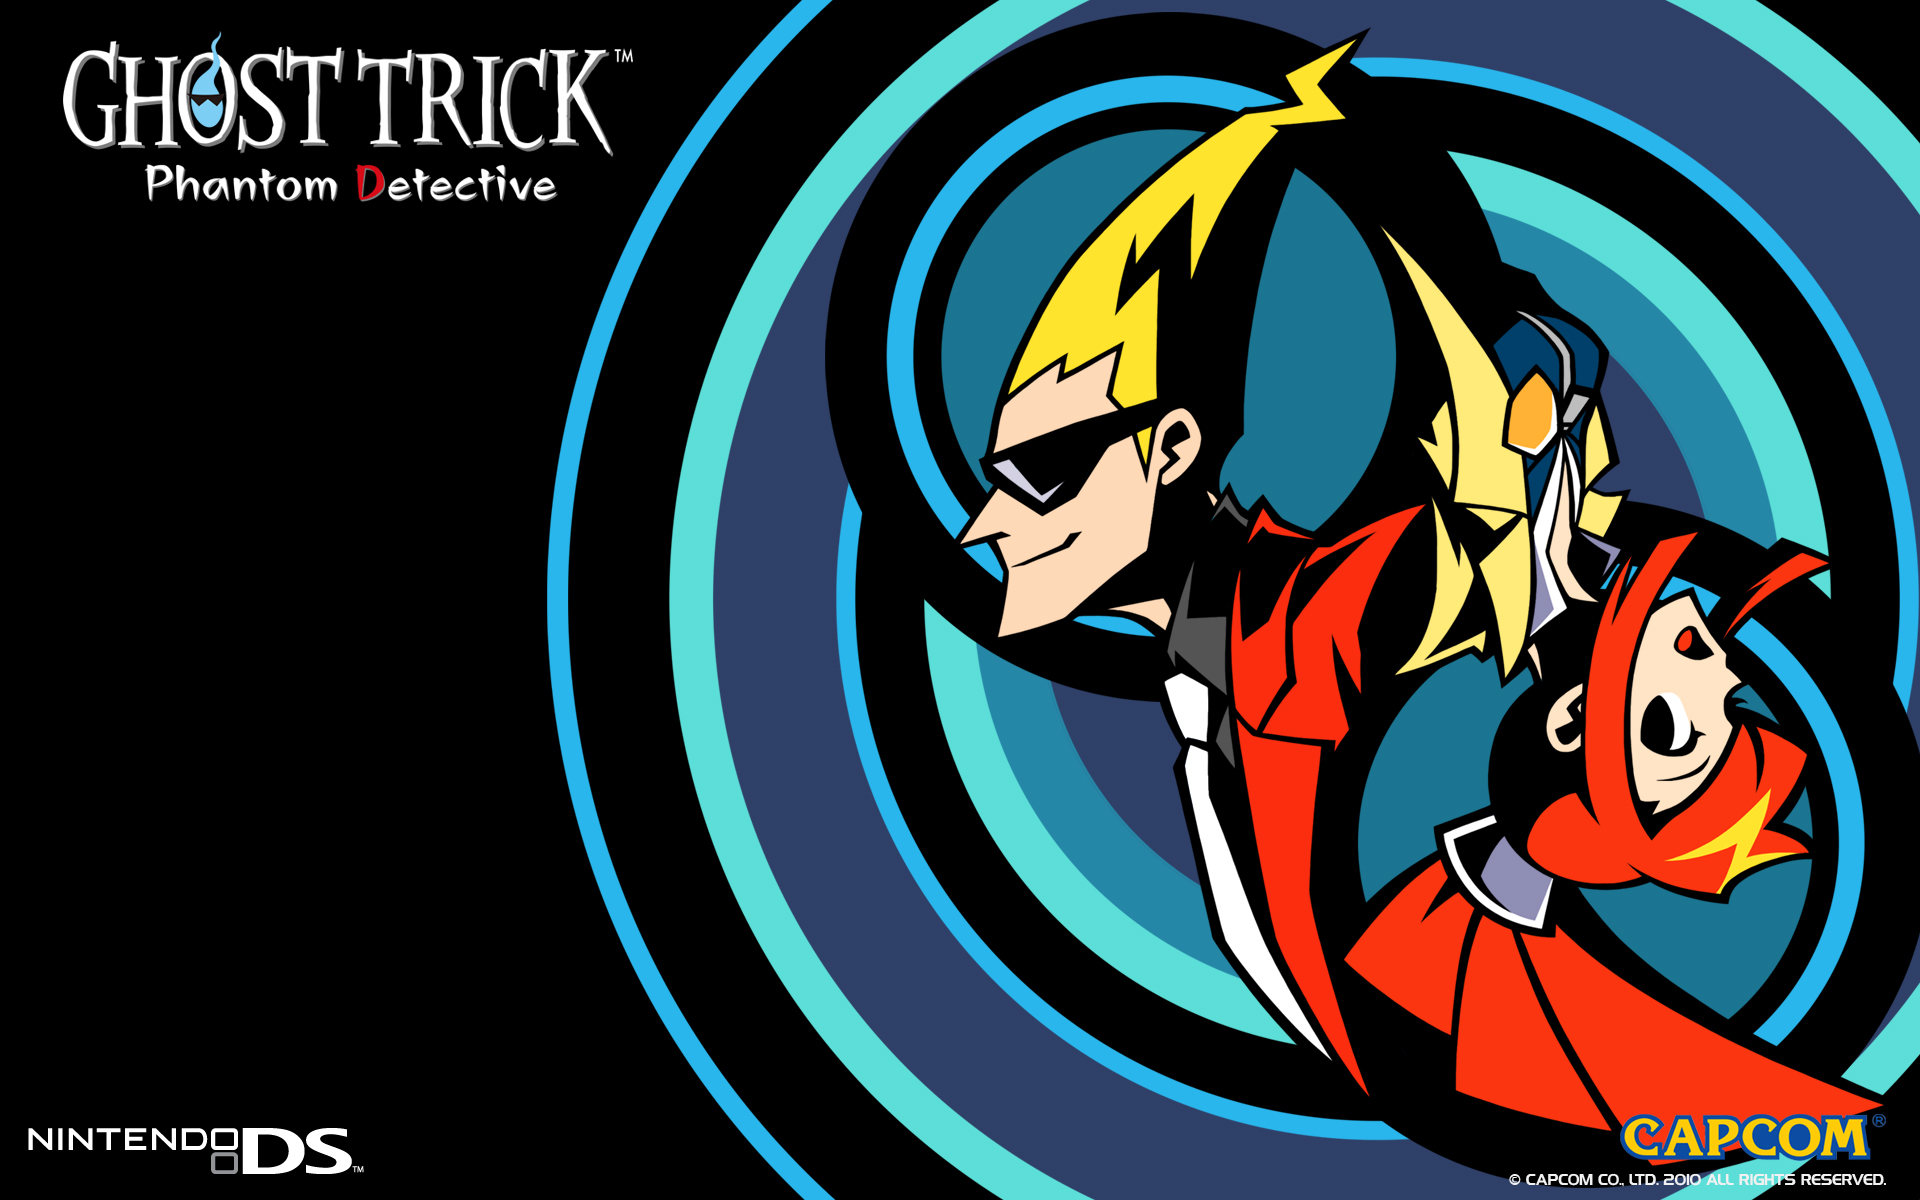 The logo and main characters of Ghost Trick for Nintendo DS